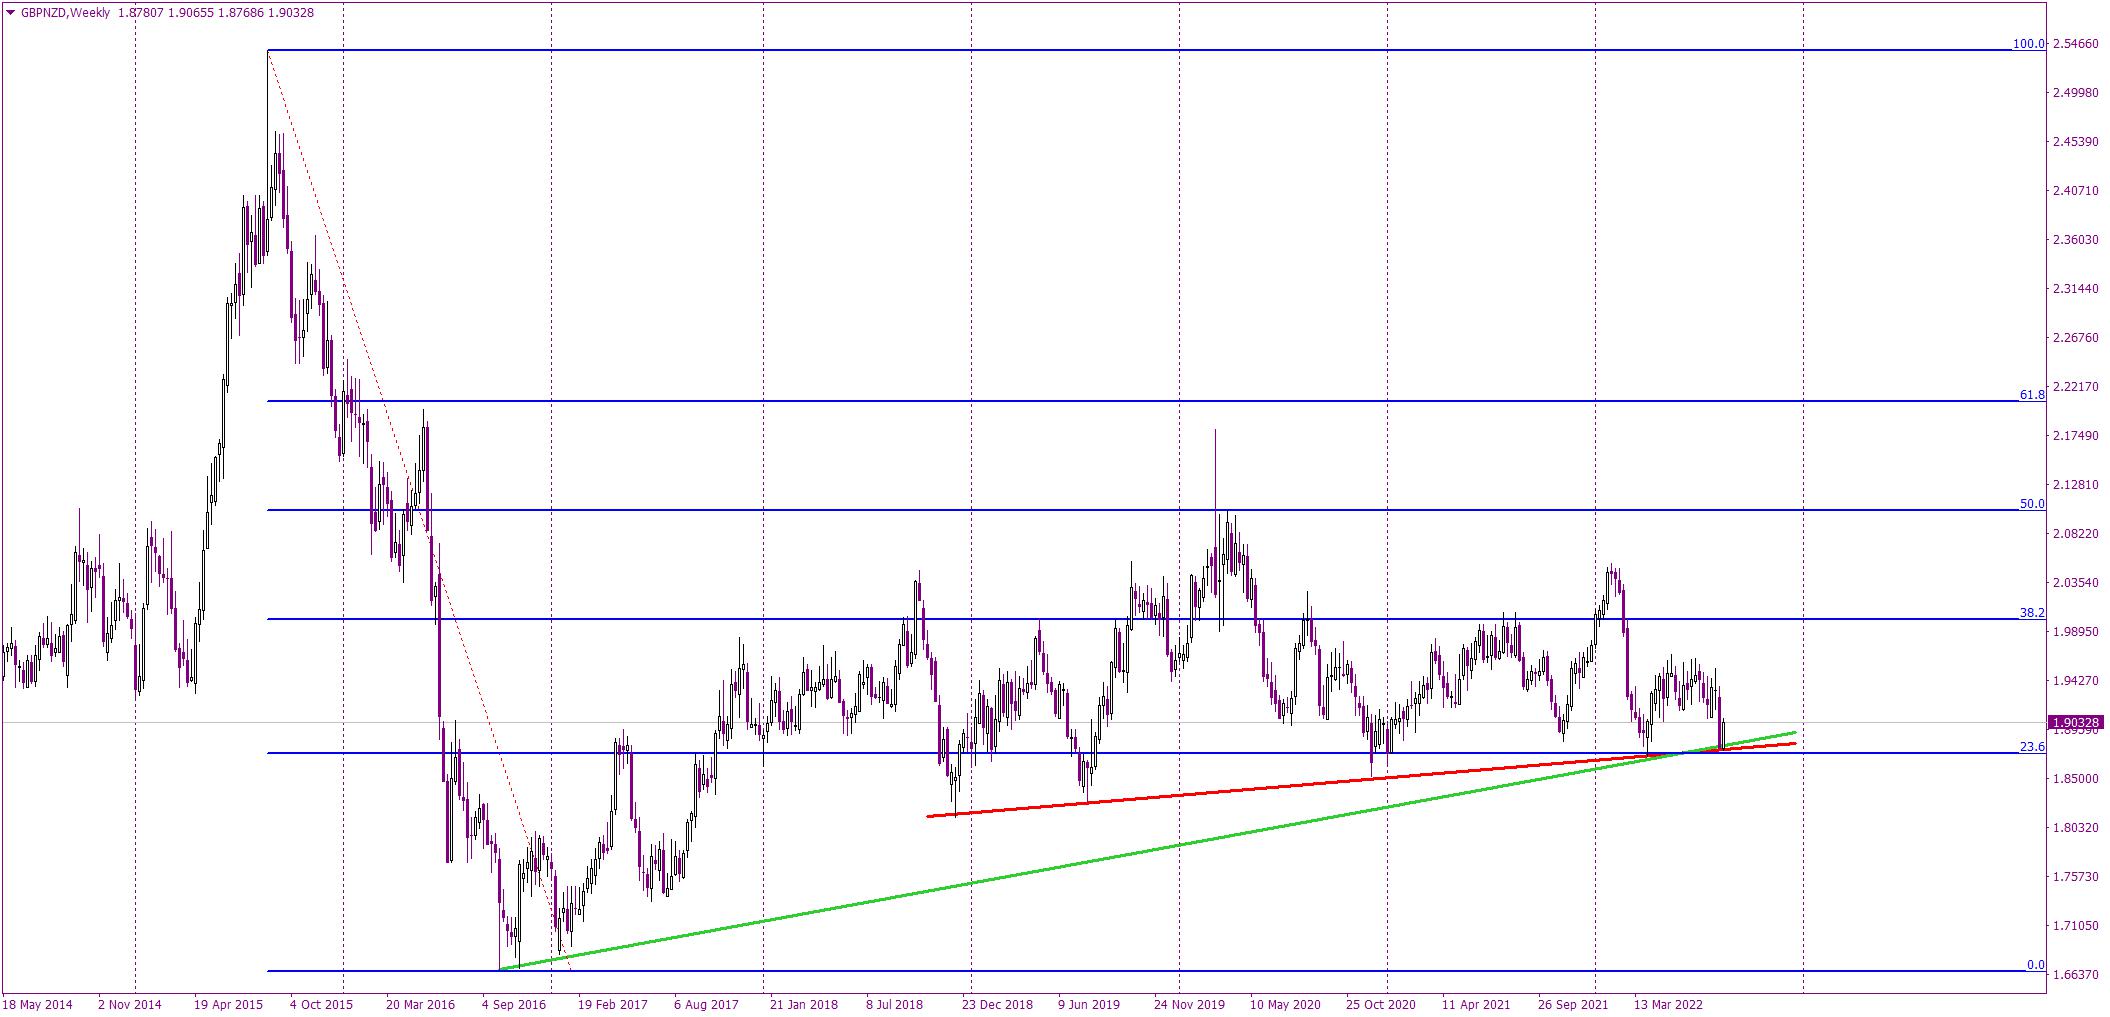 GBP/NZD bounces off an absolutely crucial, long-term support